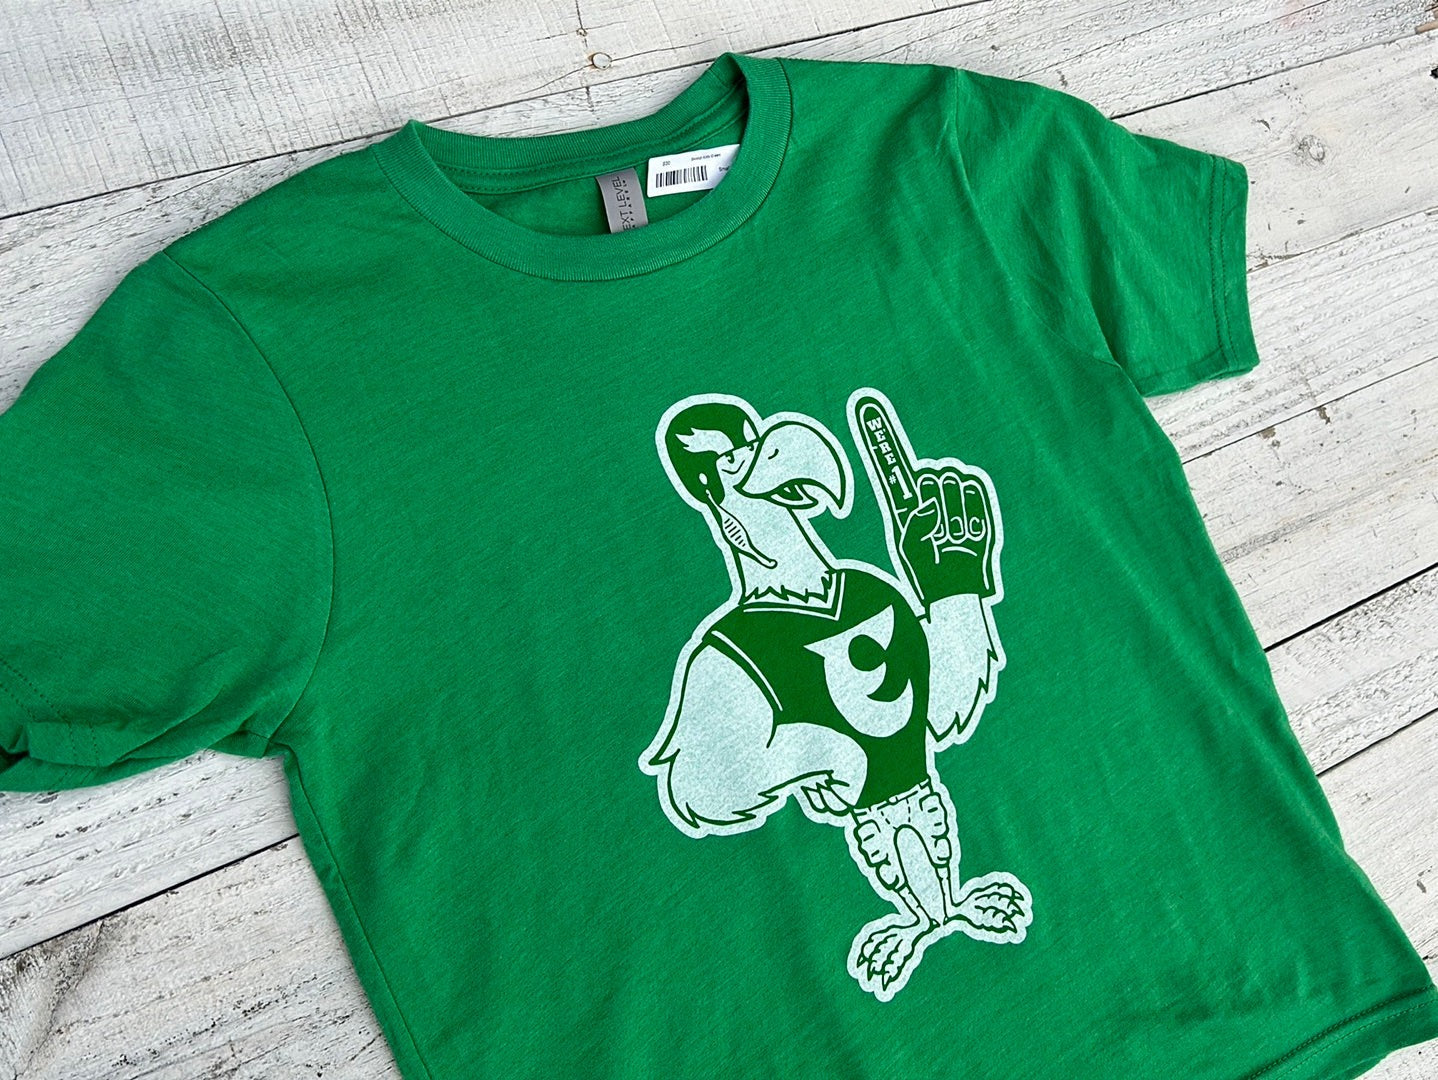 BlueRooted Swoop Green T